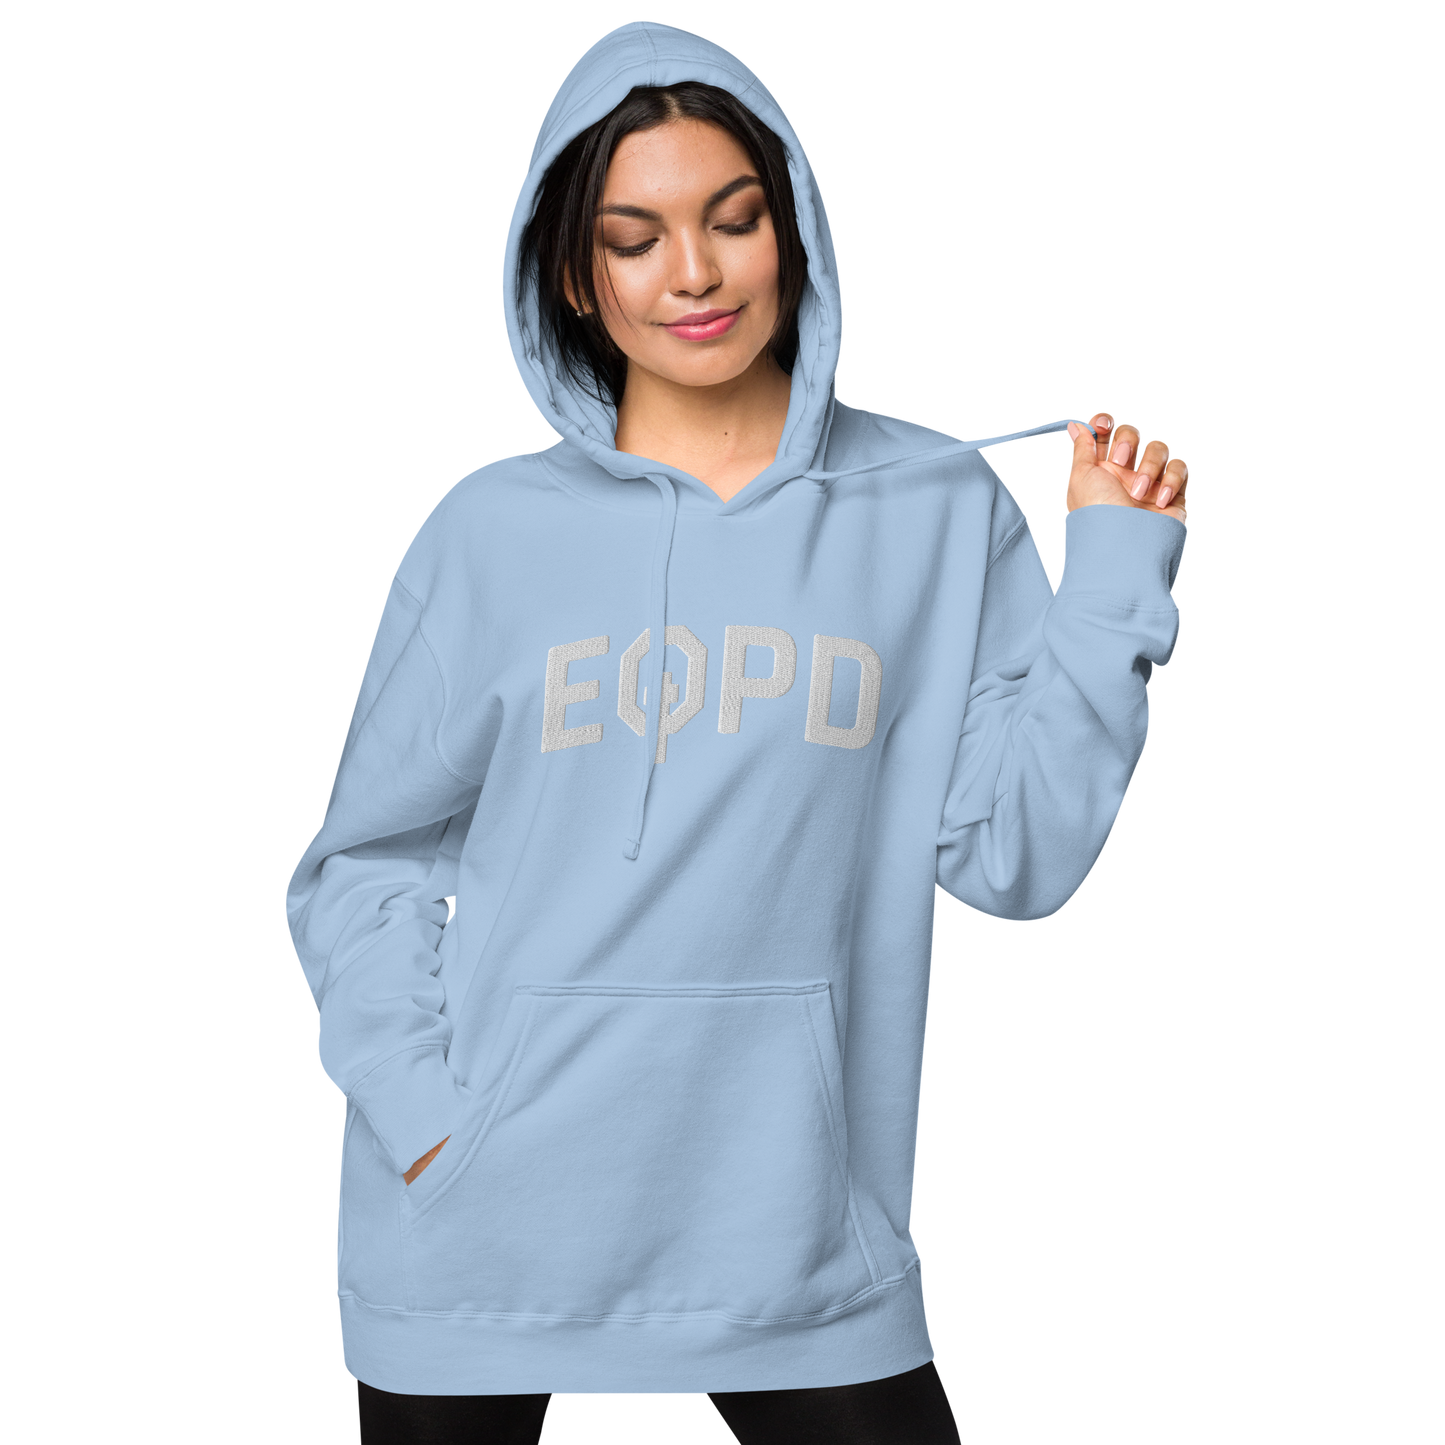 EQPD Oversized washed-out hoodie